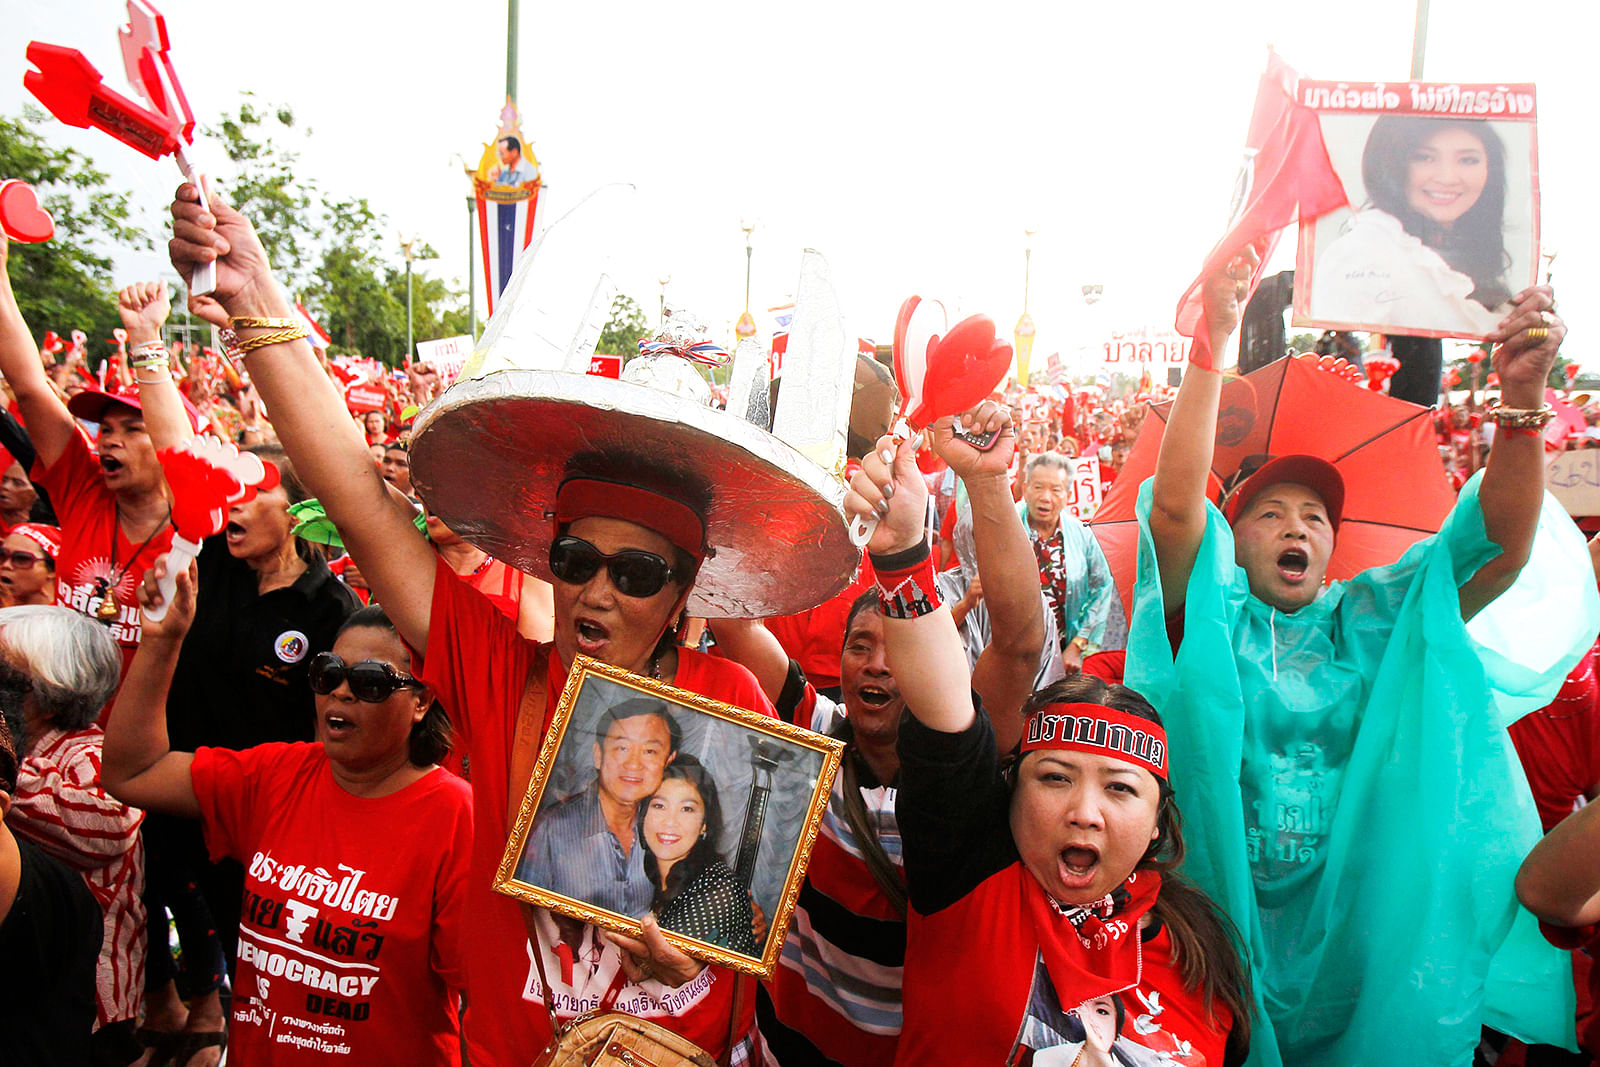 A member of the pro-government "red shirt" group gestures while holding a picture of ousted Thai Prime Minister Yingluck Shinawatra and her brother Thaksin during a rally in Nakhon Pathom province on the outskirts of Bangkok, May 11, 2014. Photo: Reuters